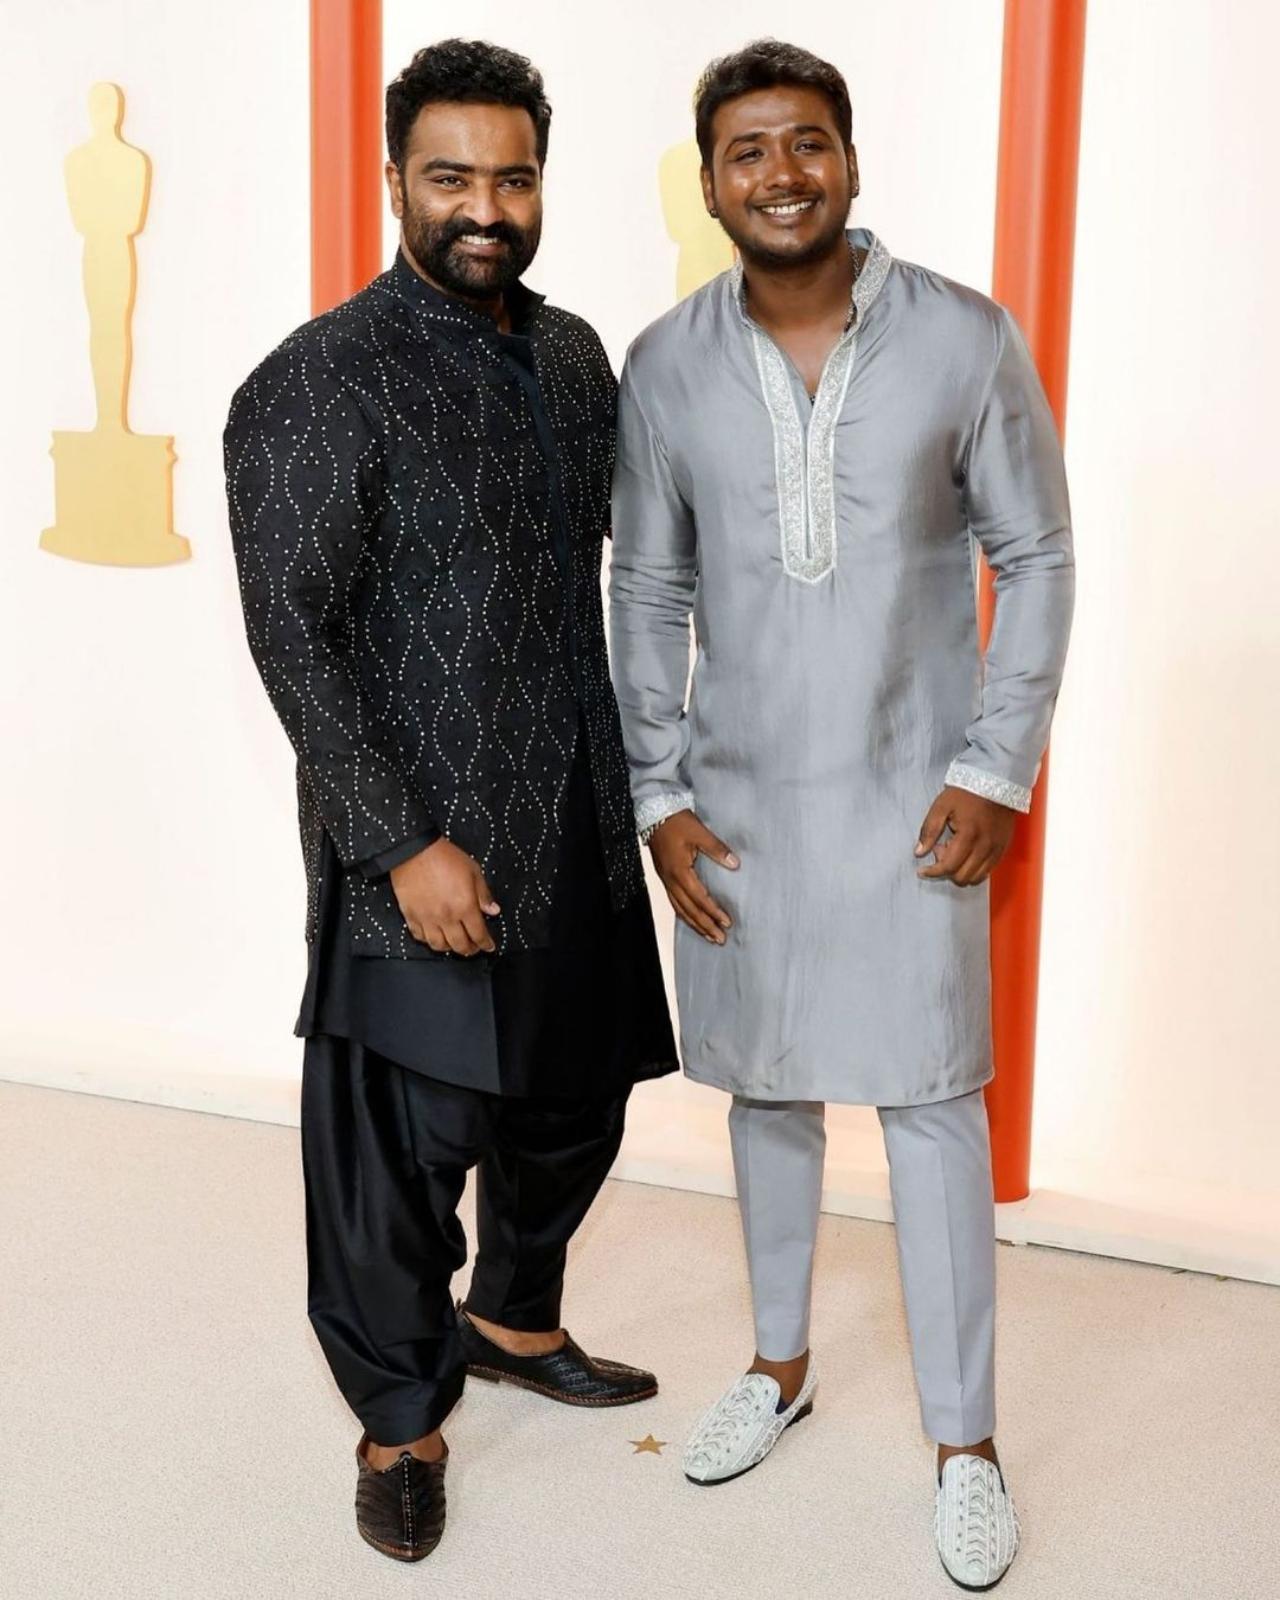 The Oscar-nominated song 'Naatu Naatu' from S.S. Rajamouli's RRR will also be performed at the 95th Academy Awards by singers Rahul Sipligunj and Kaala Bhairava in their Oscar debut